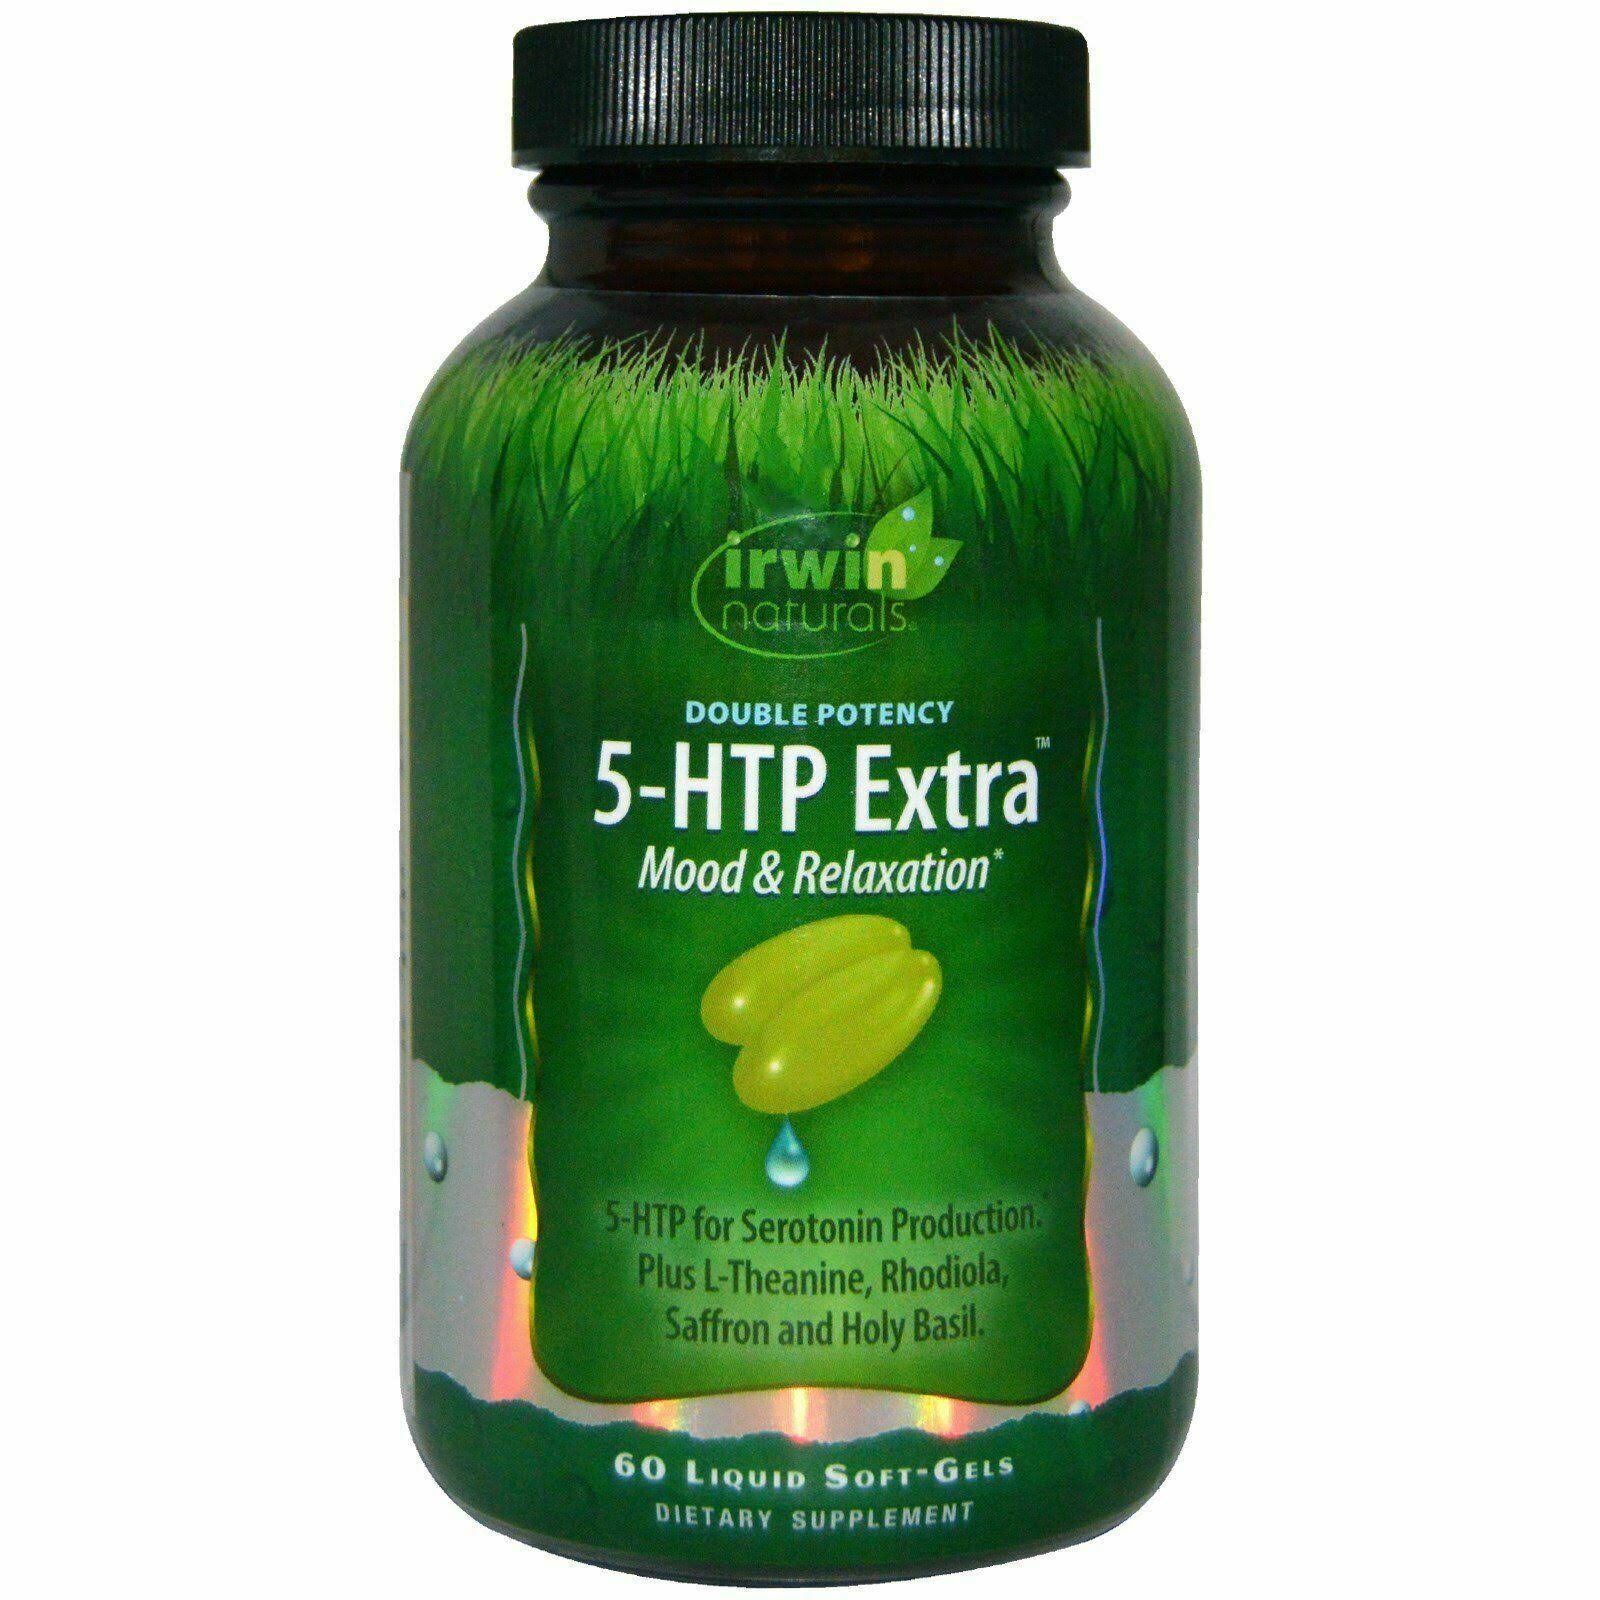 Irwin Naturals Double Potency 5-HTP Extra Supplement - 60 Capsules